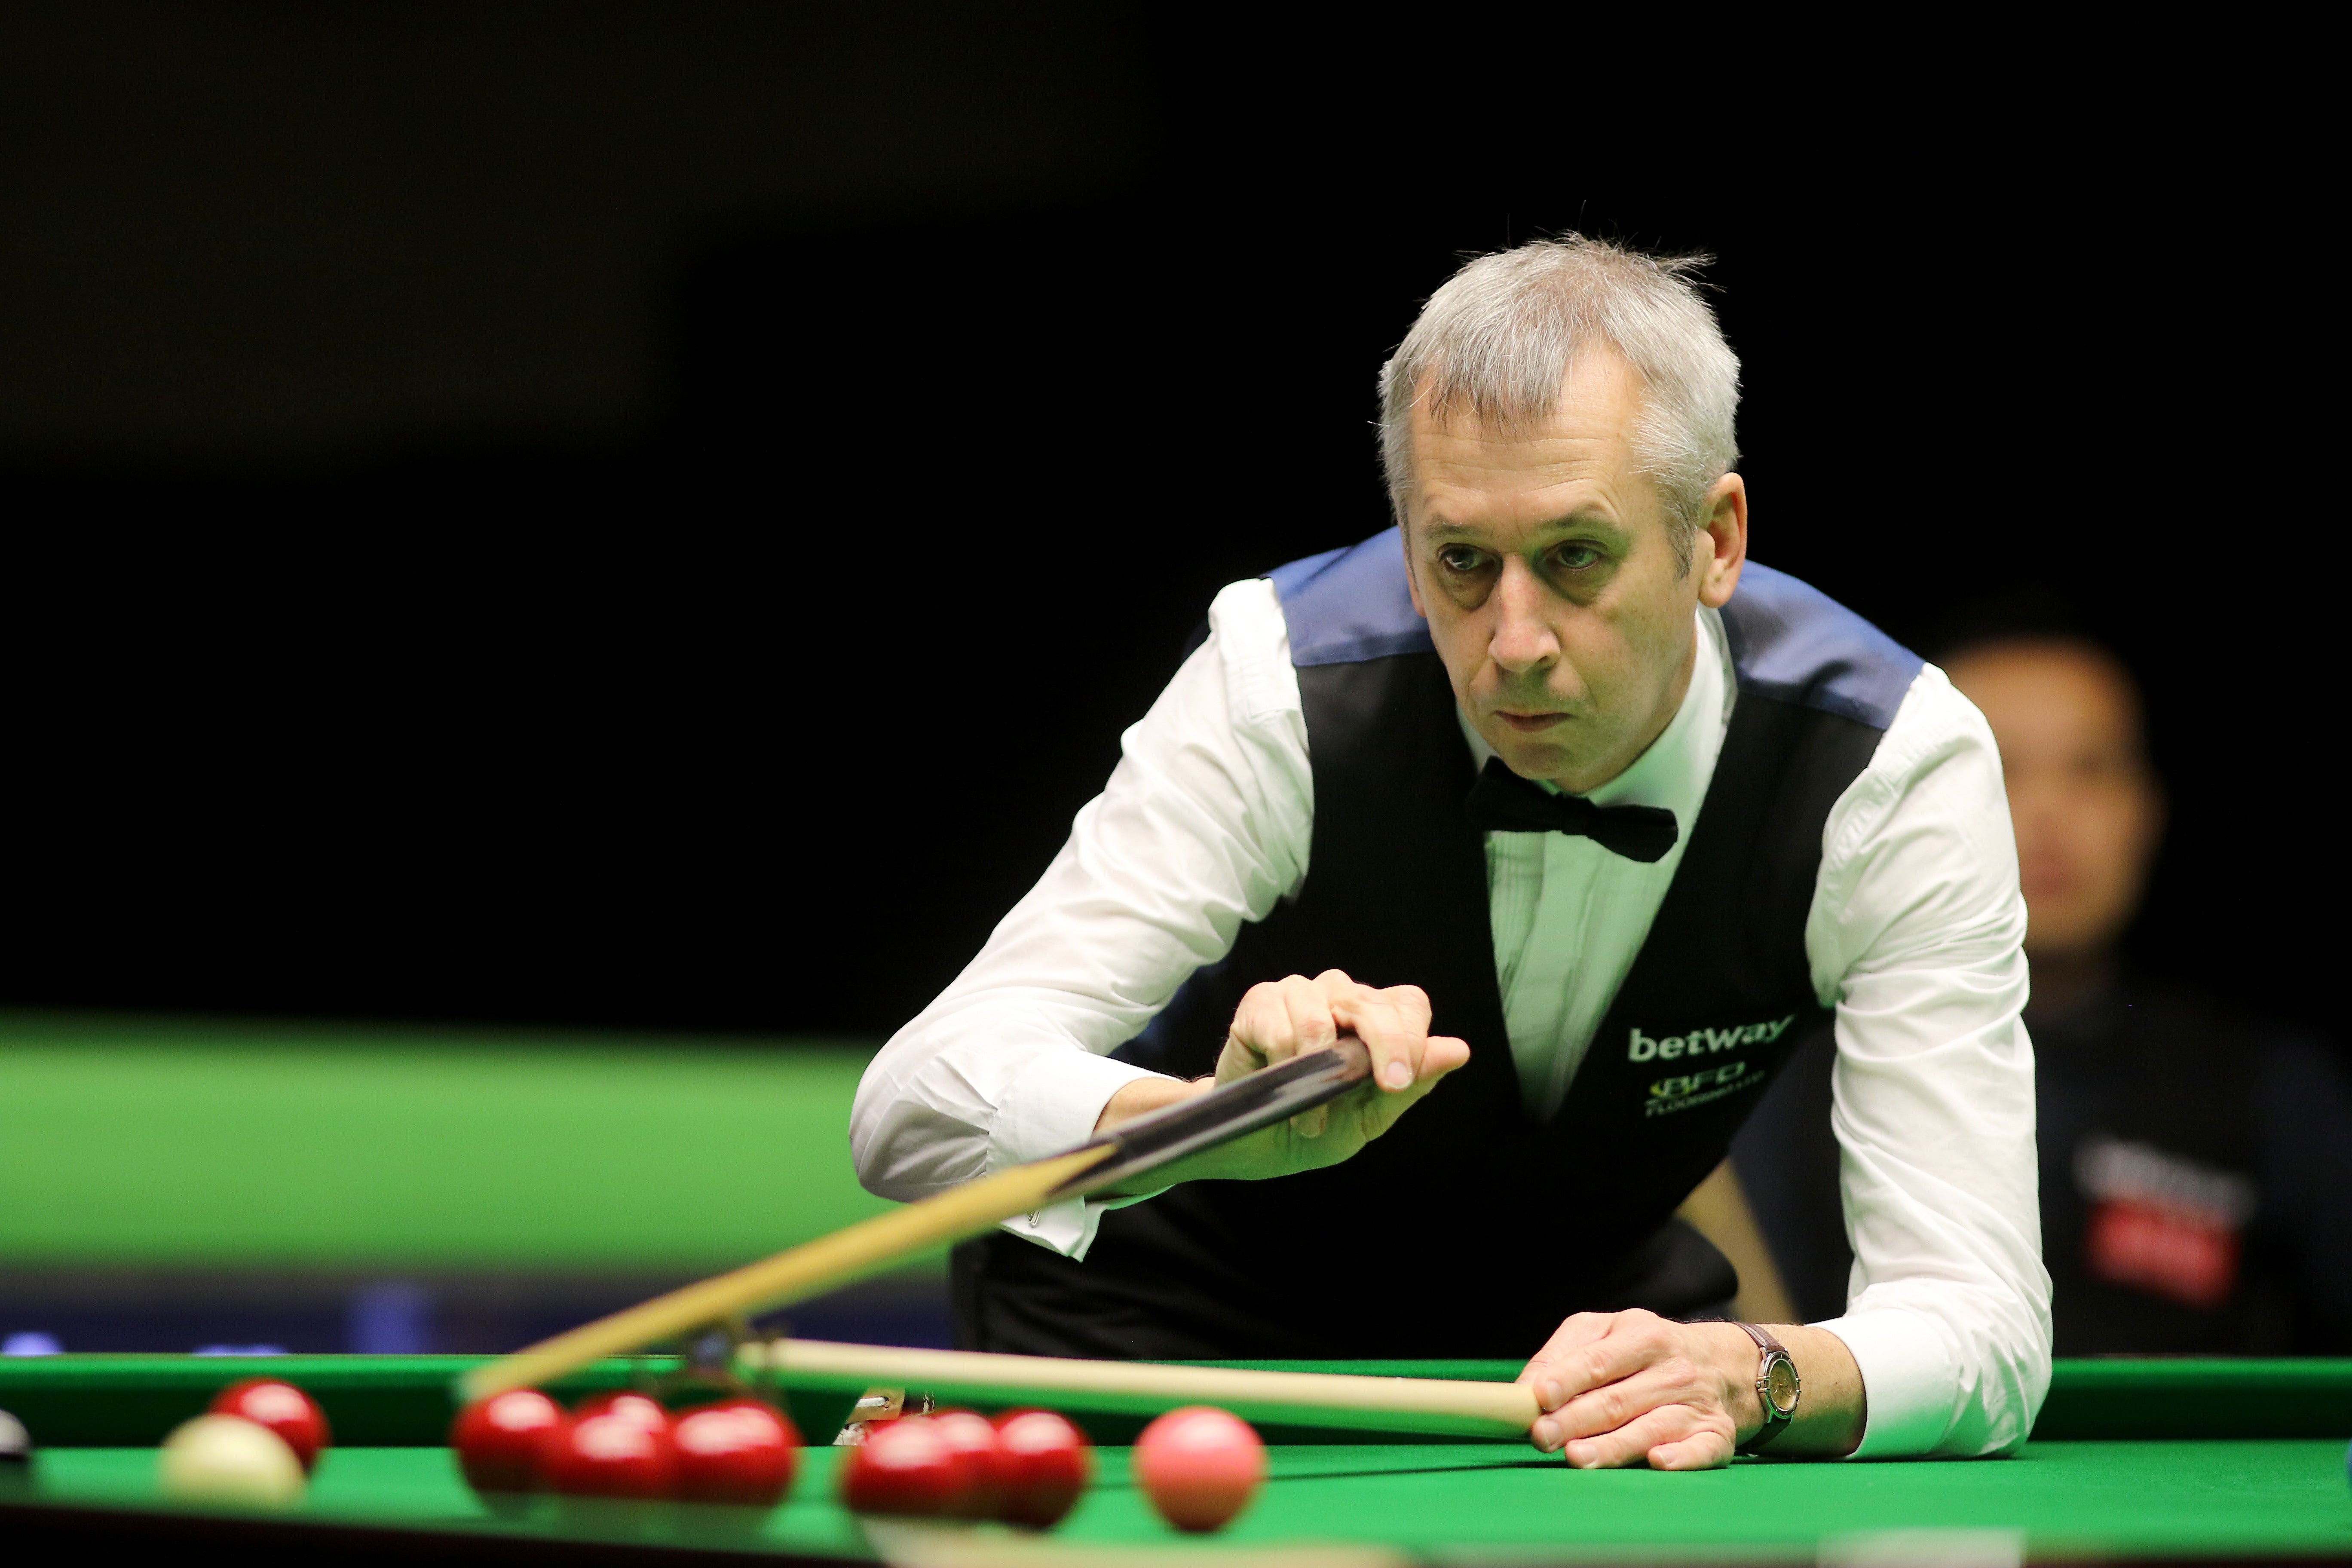 Nigel Bond retires from snooker after World Championship qualifying exit The Independent